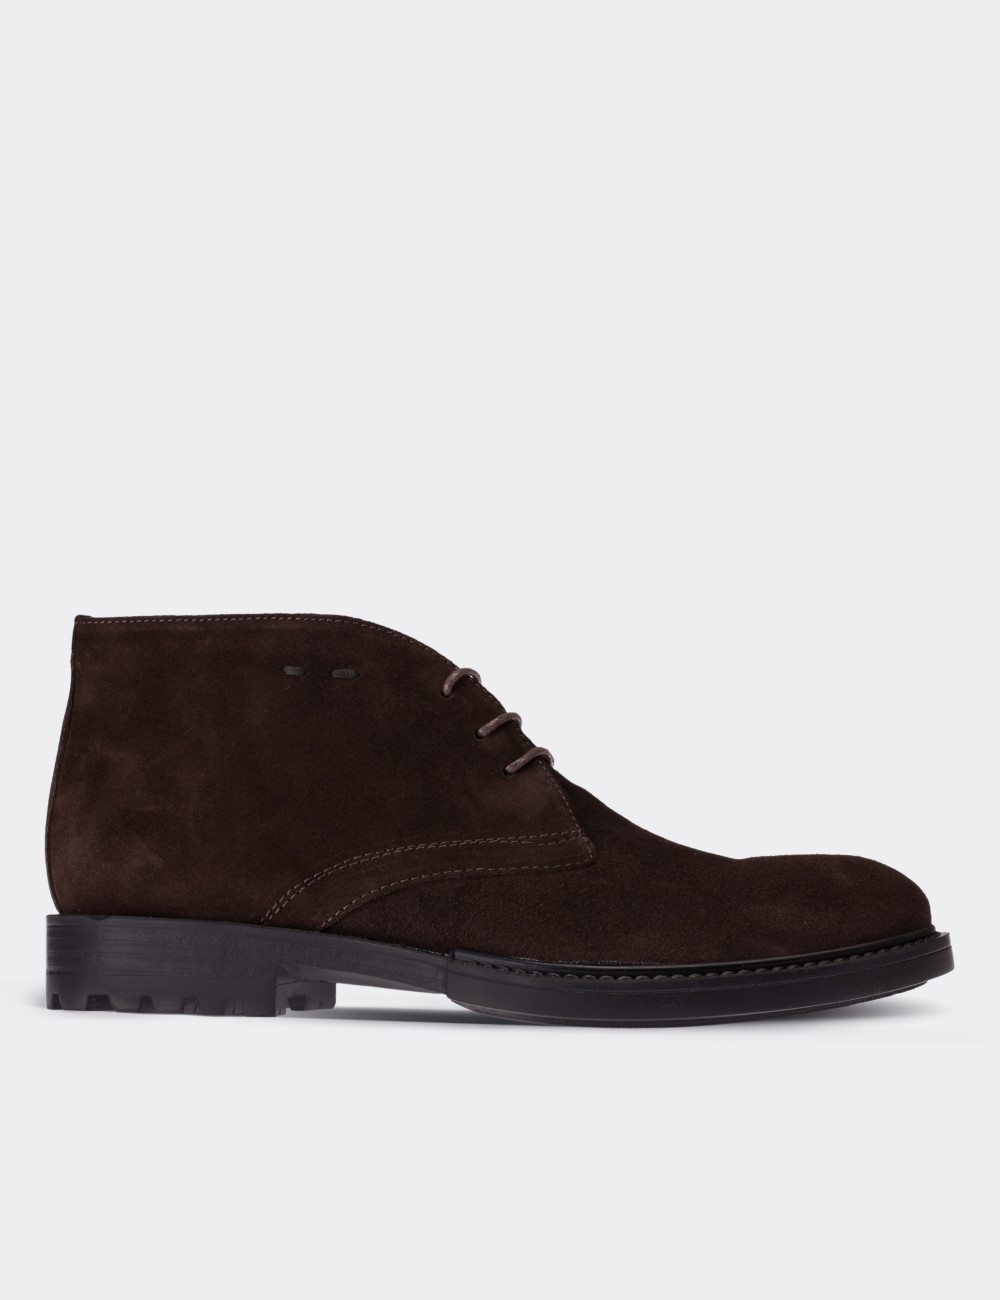 Brown Suede Leather Desert Boots - 01295MKHVC01